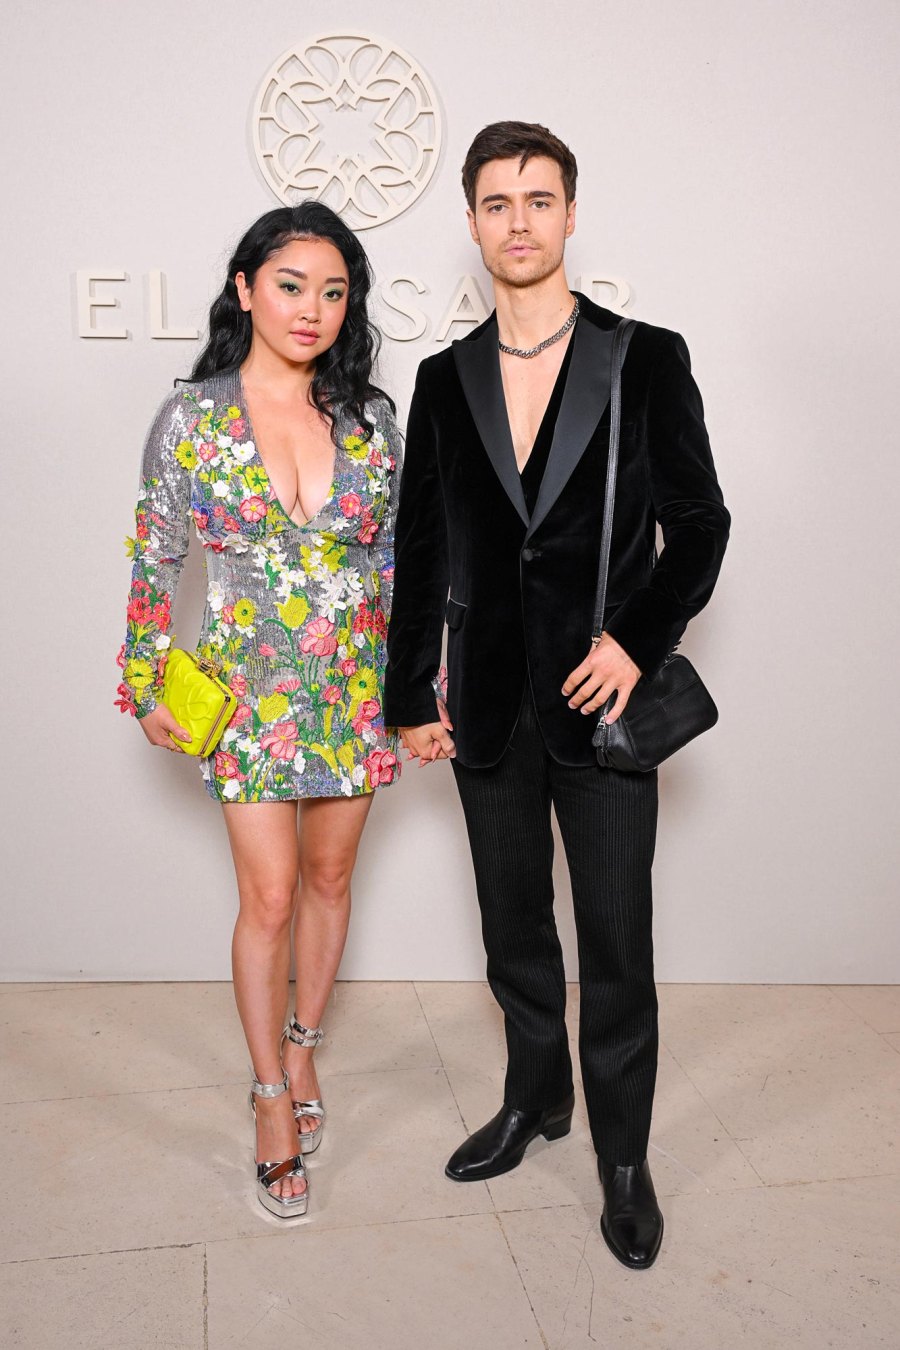 Couple Style Gallery of 2023 622 Lana Condor and Anthony De La Torre